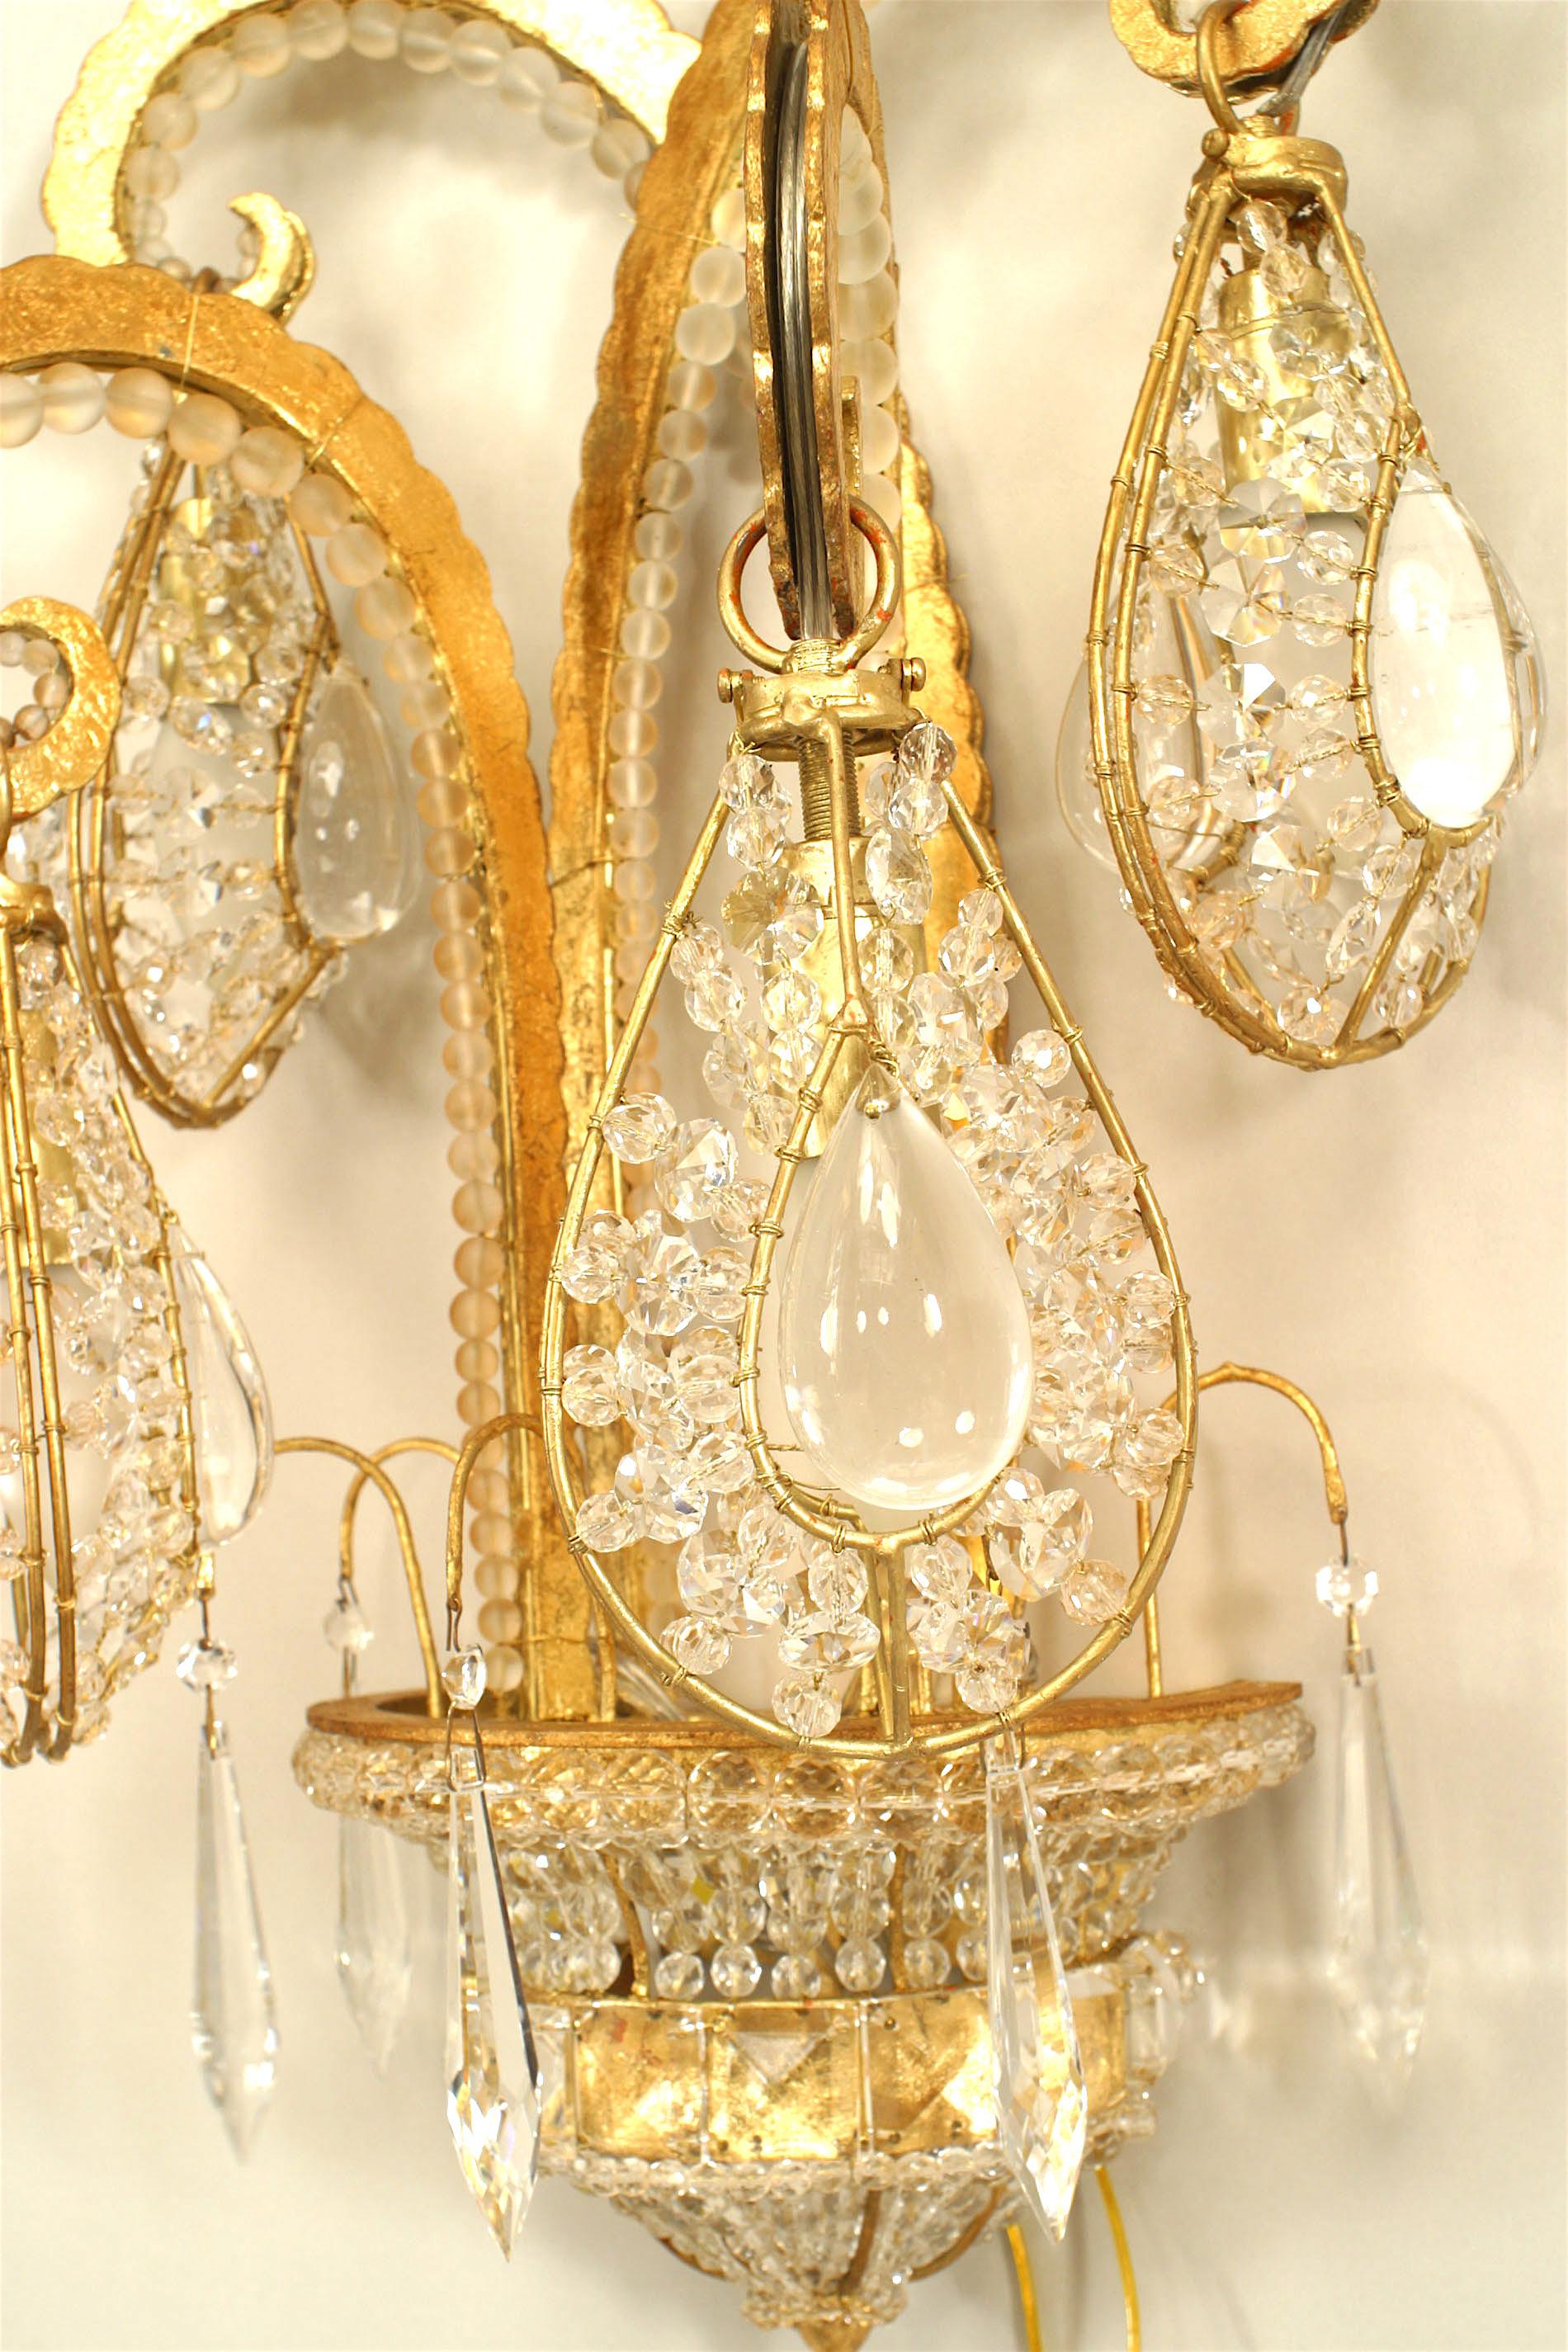 French 5 Art Deco Gilt Metal & Glass Octopus Wall Sconces in Maison Bagues Manner For Sale